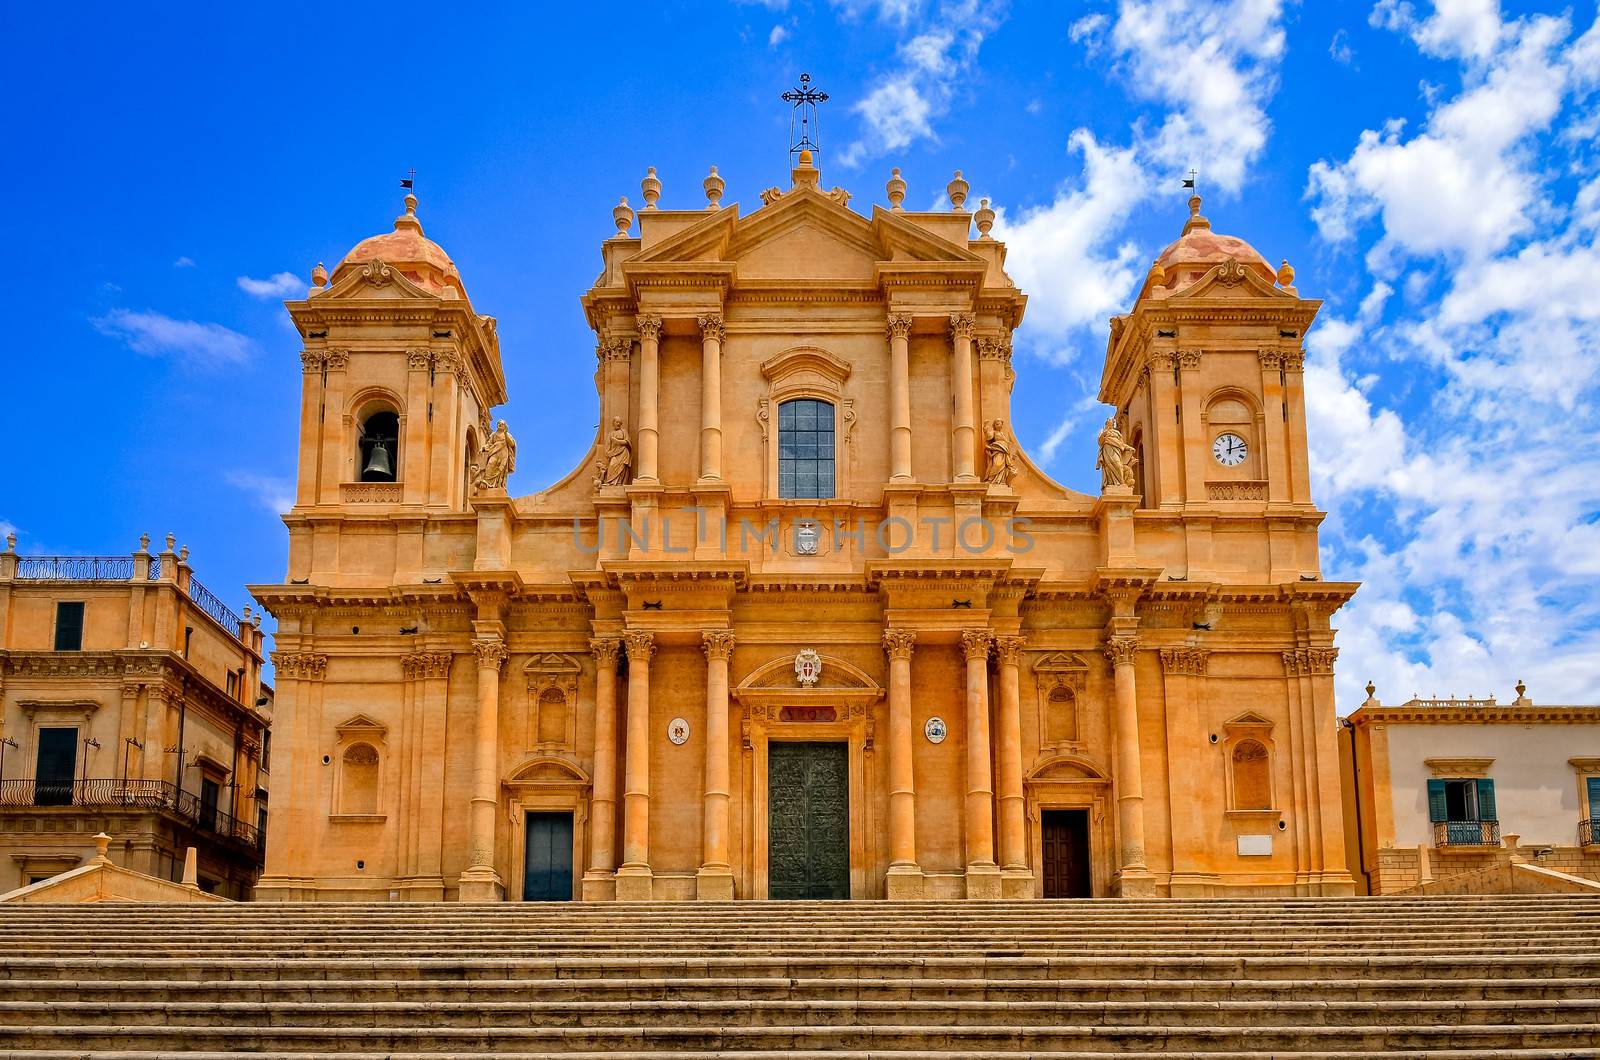 Baroque style cathedral in old town Noto, Sicily, Italy